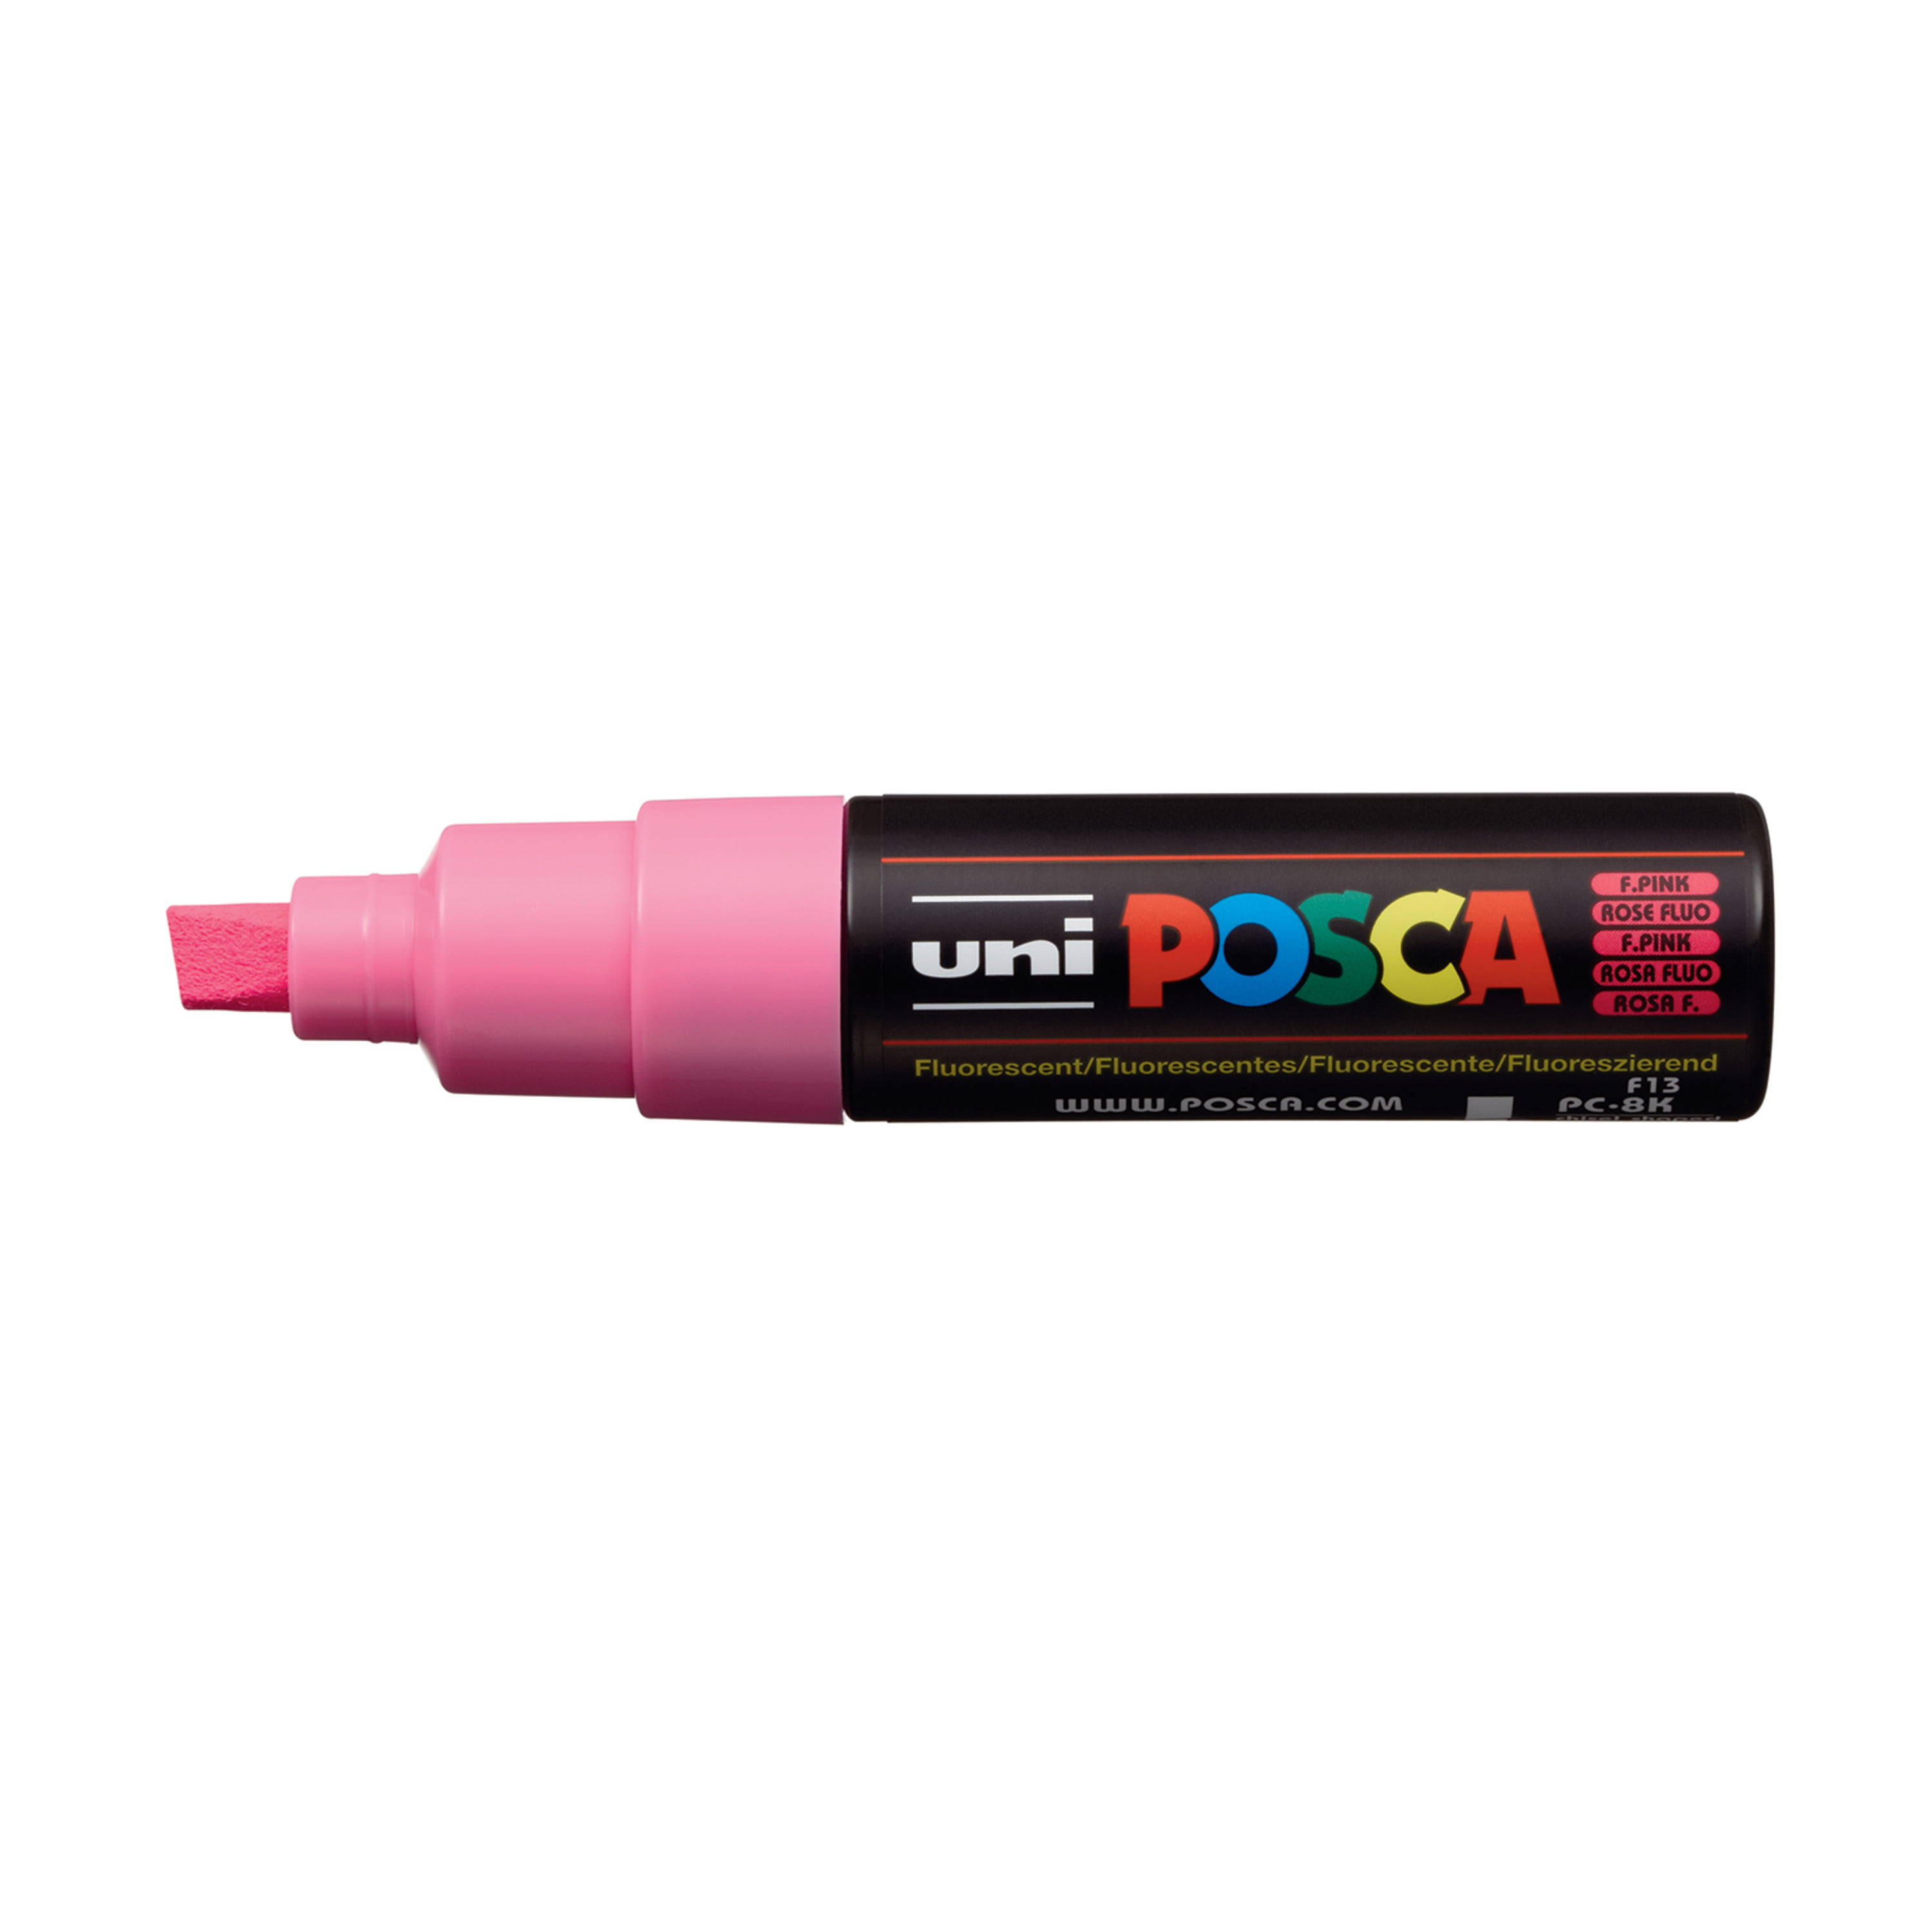 Small Posca Paint Marker - Park Place Printing And Promotional Products, LLC